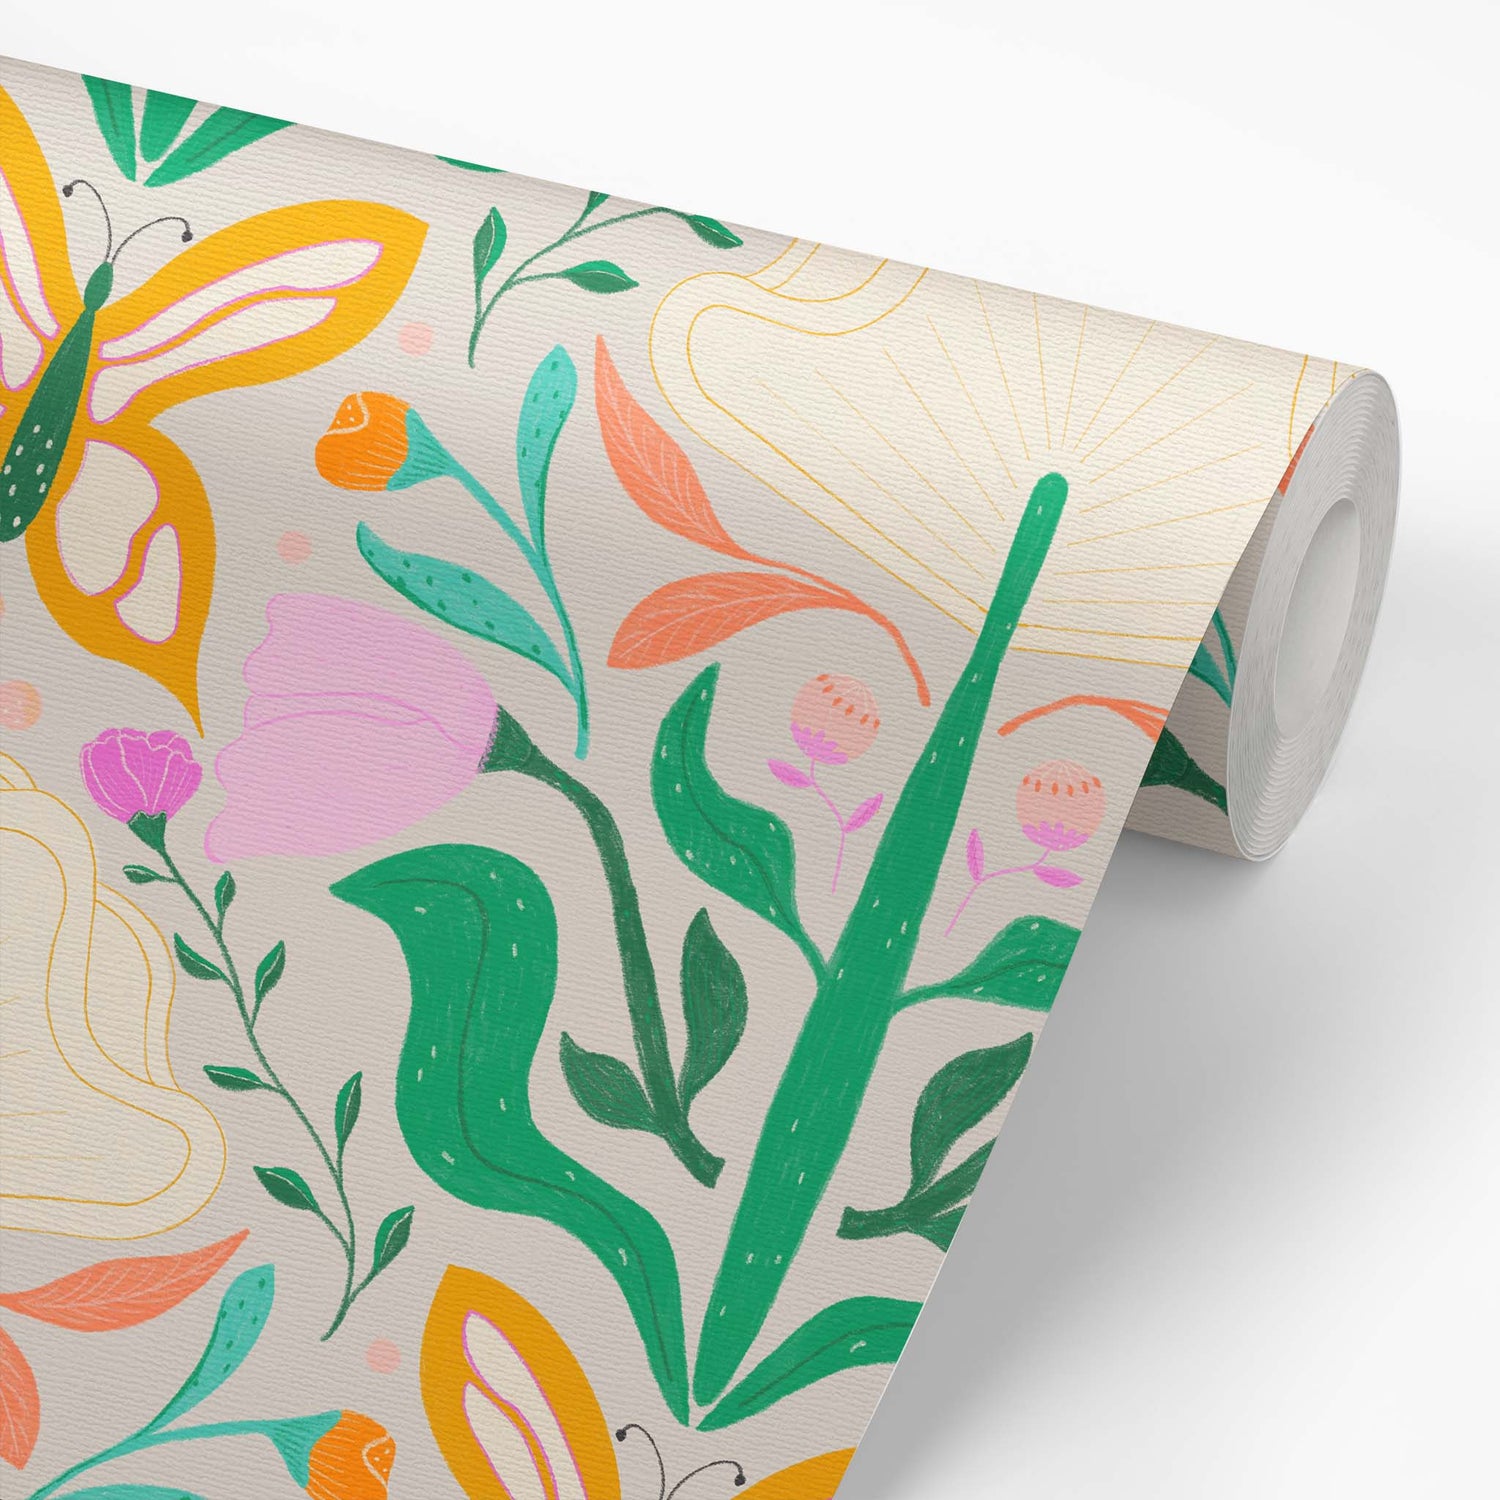 Wallpaper roll featuring our Floral Damask Wallpaper in Bright colors by artist Brenda Bird for Ayara